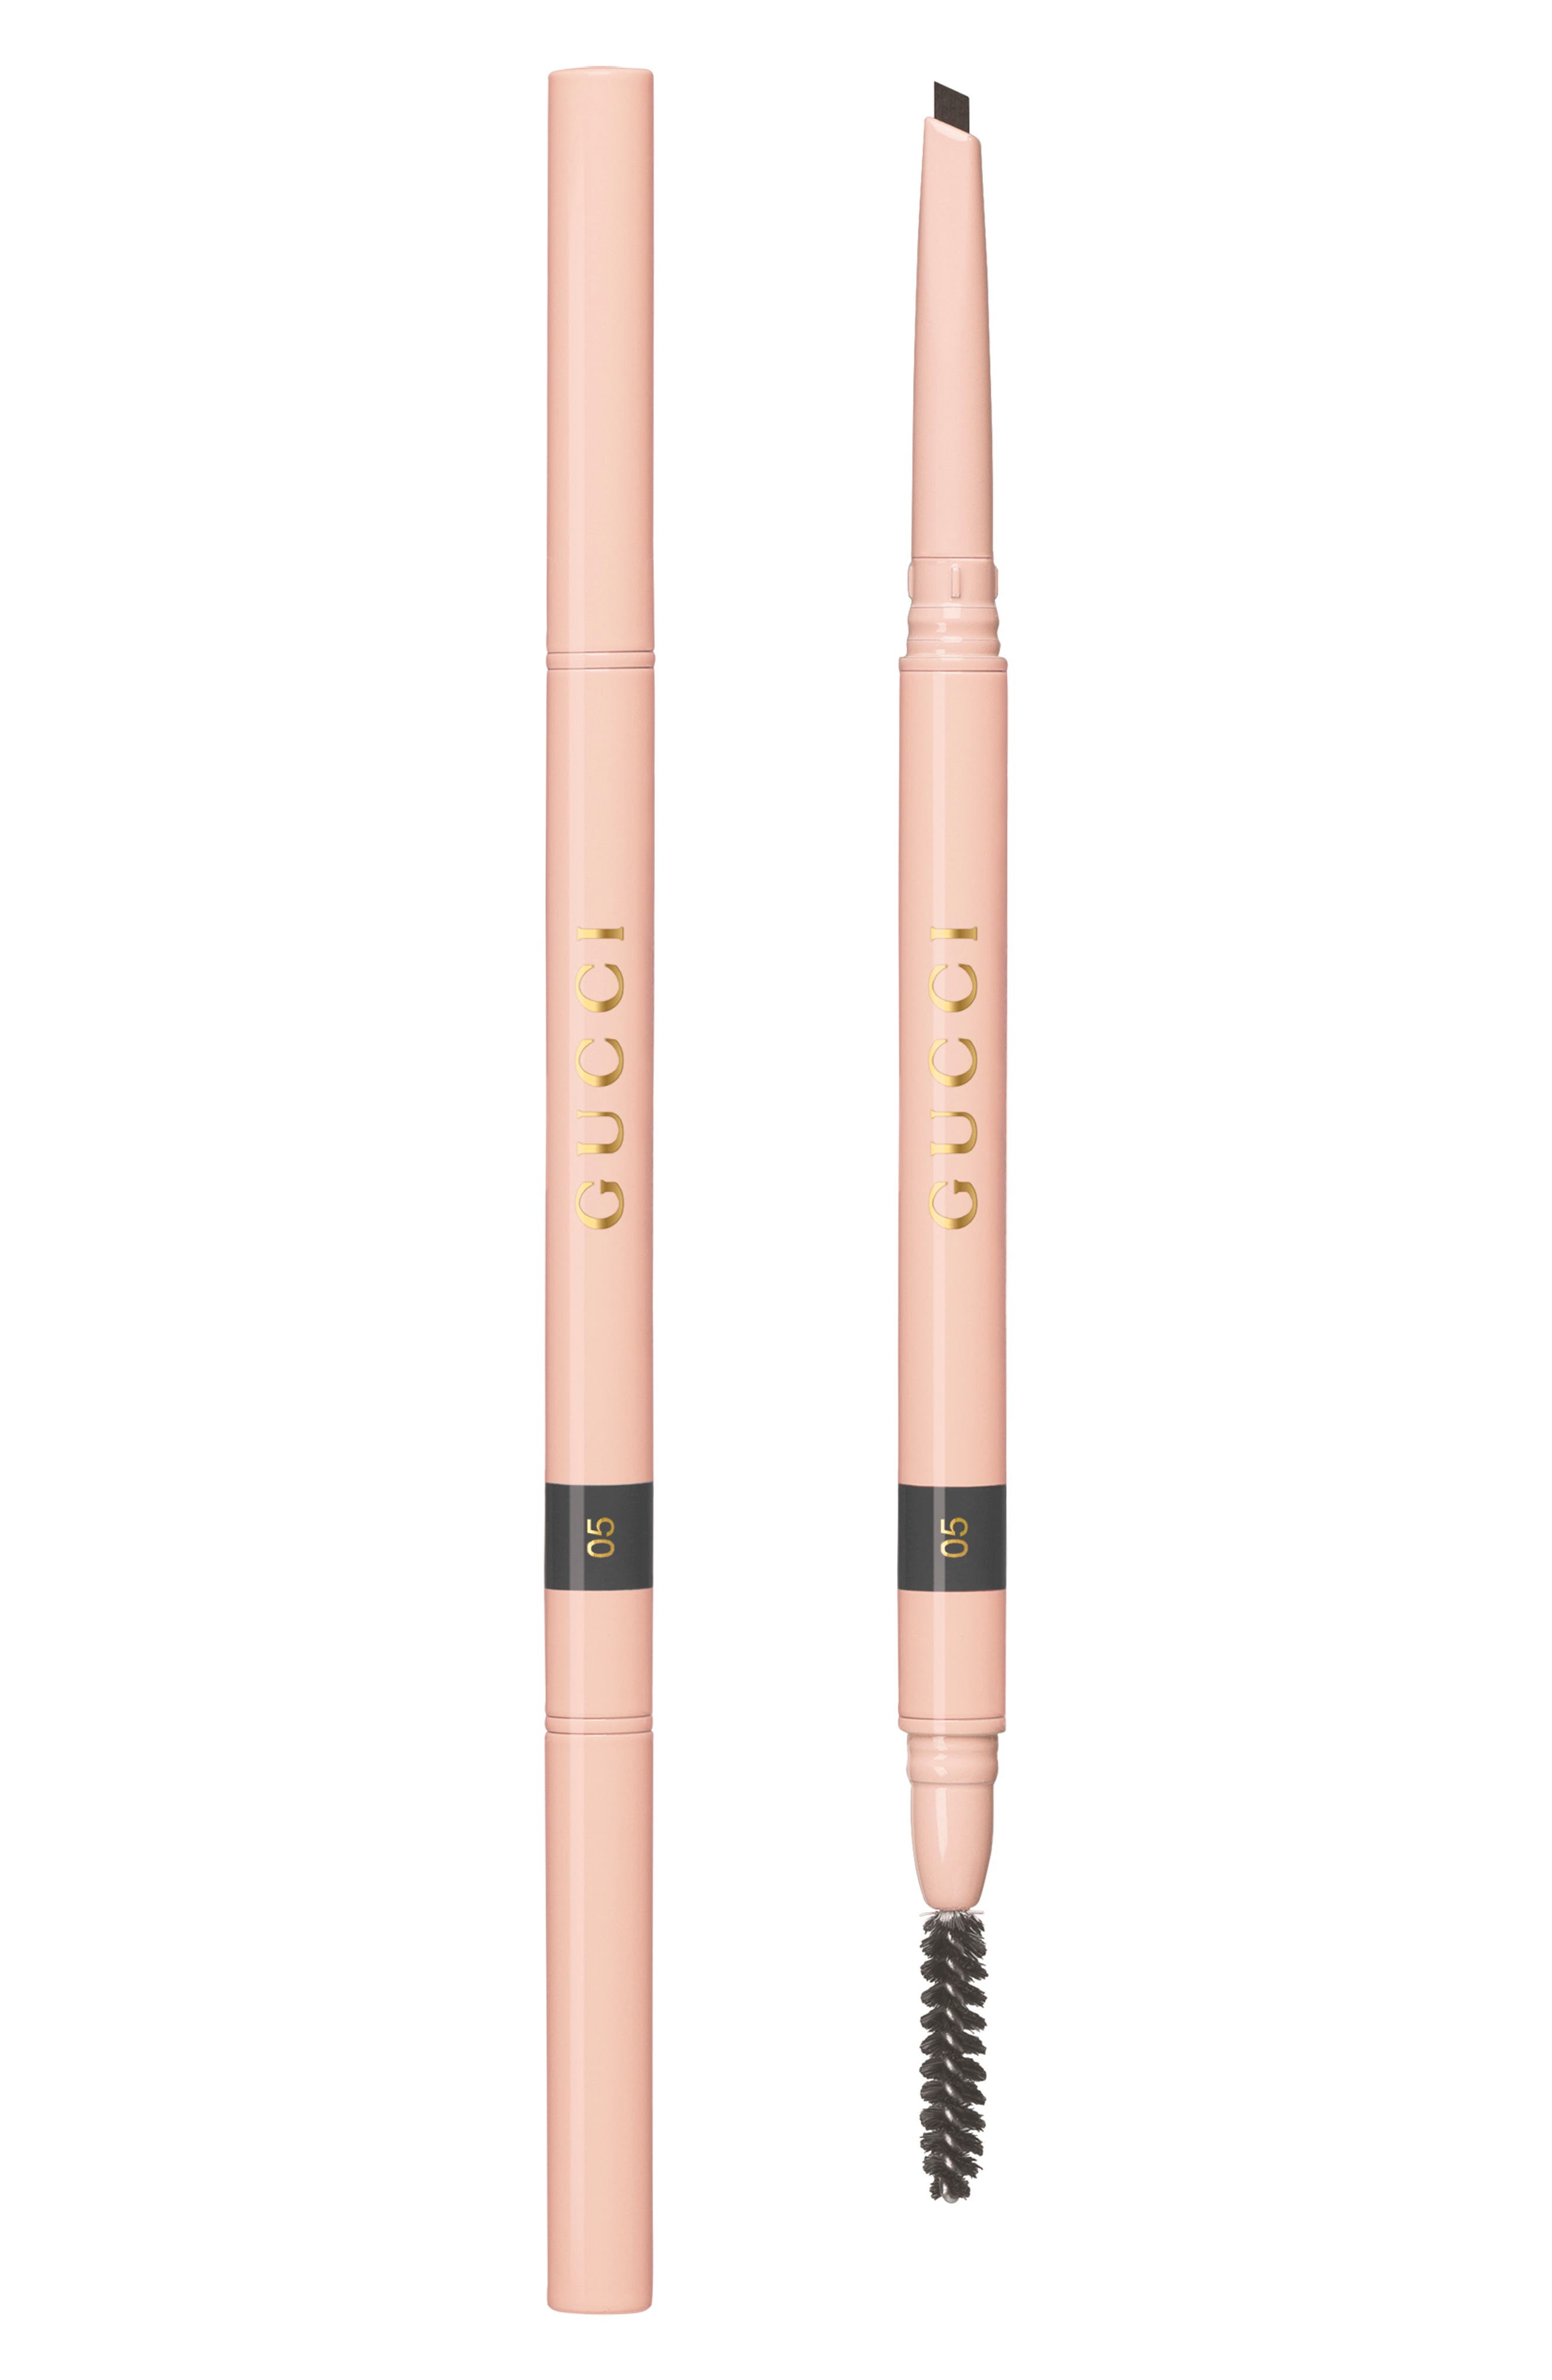 Gucci Stylo A Sourcils Waterpoof Eyebrow Pencil in 05 Gris at Nordstrom